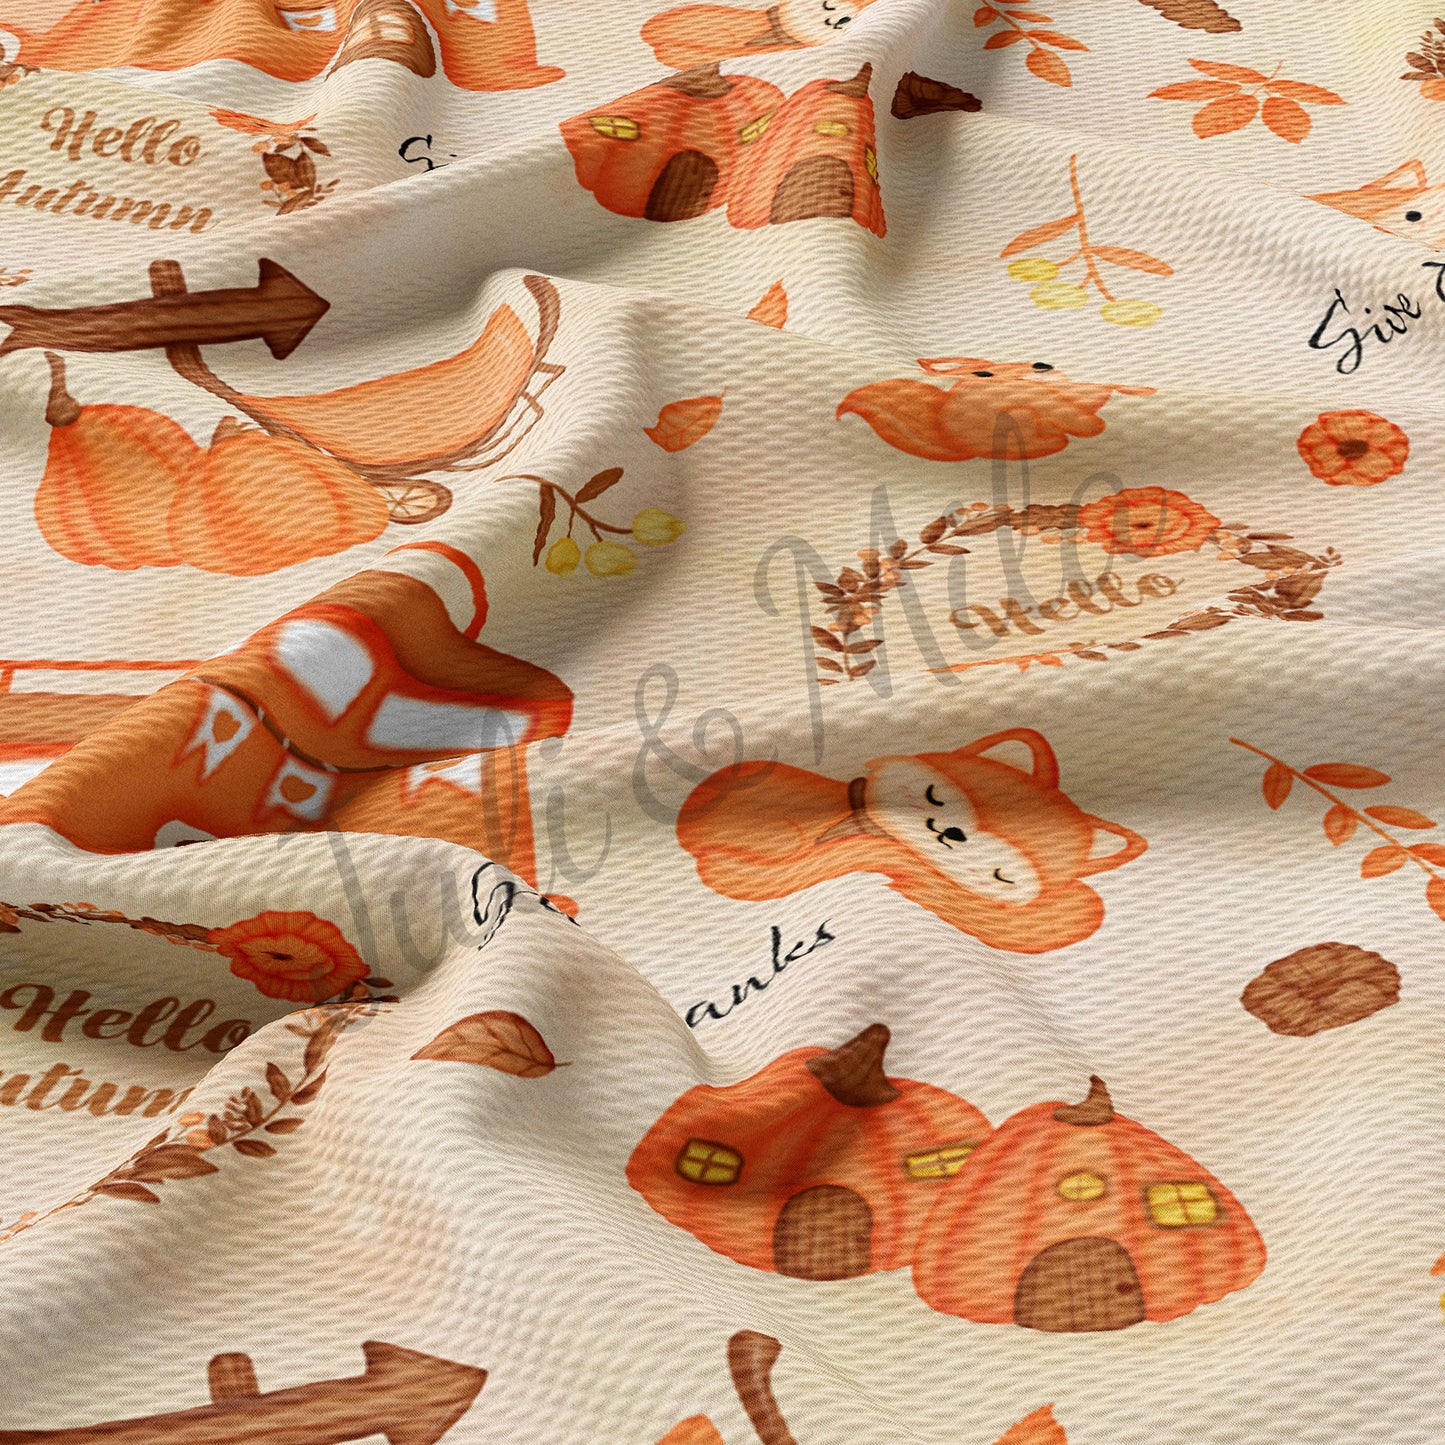 Printed Liverpool Bullet Textured Fabric by the yard 4Way Stretch Solid Strip Thick Knit Jersey Liverpool Fabric pumpkin116